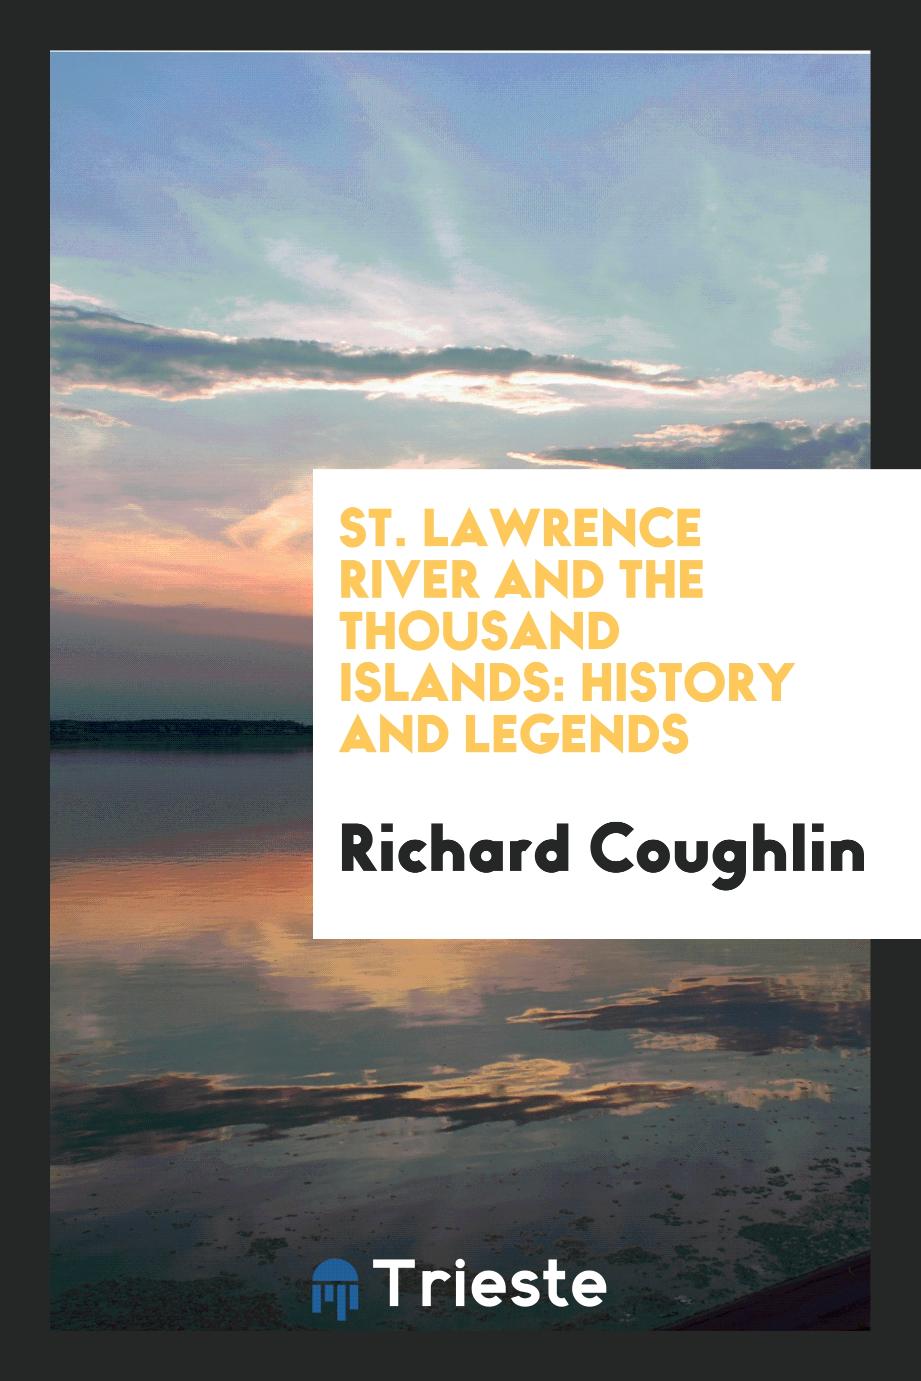 St. Lawrence River and the Thousand Islands: History and Legends